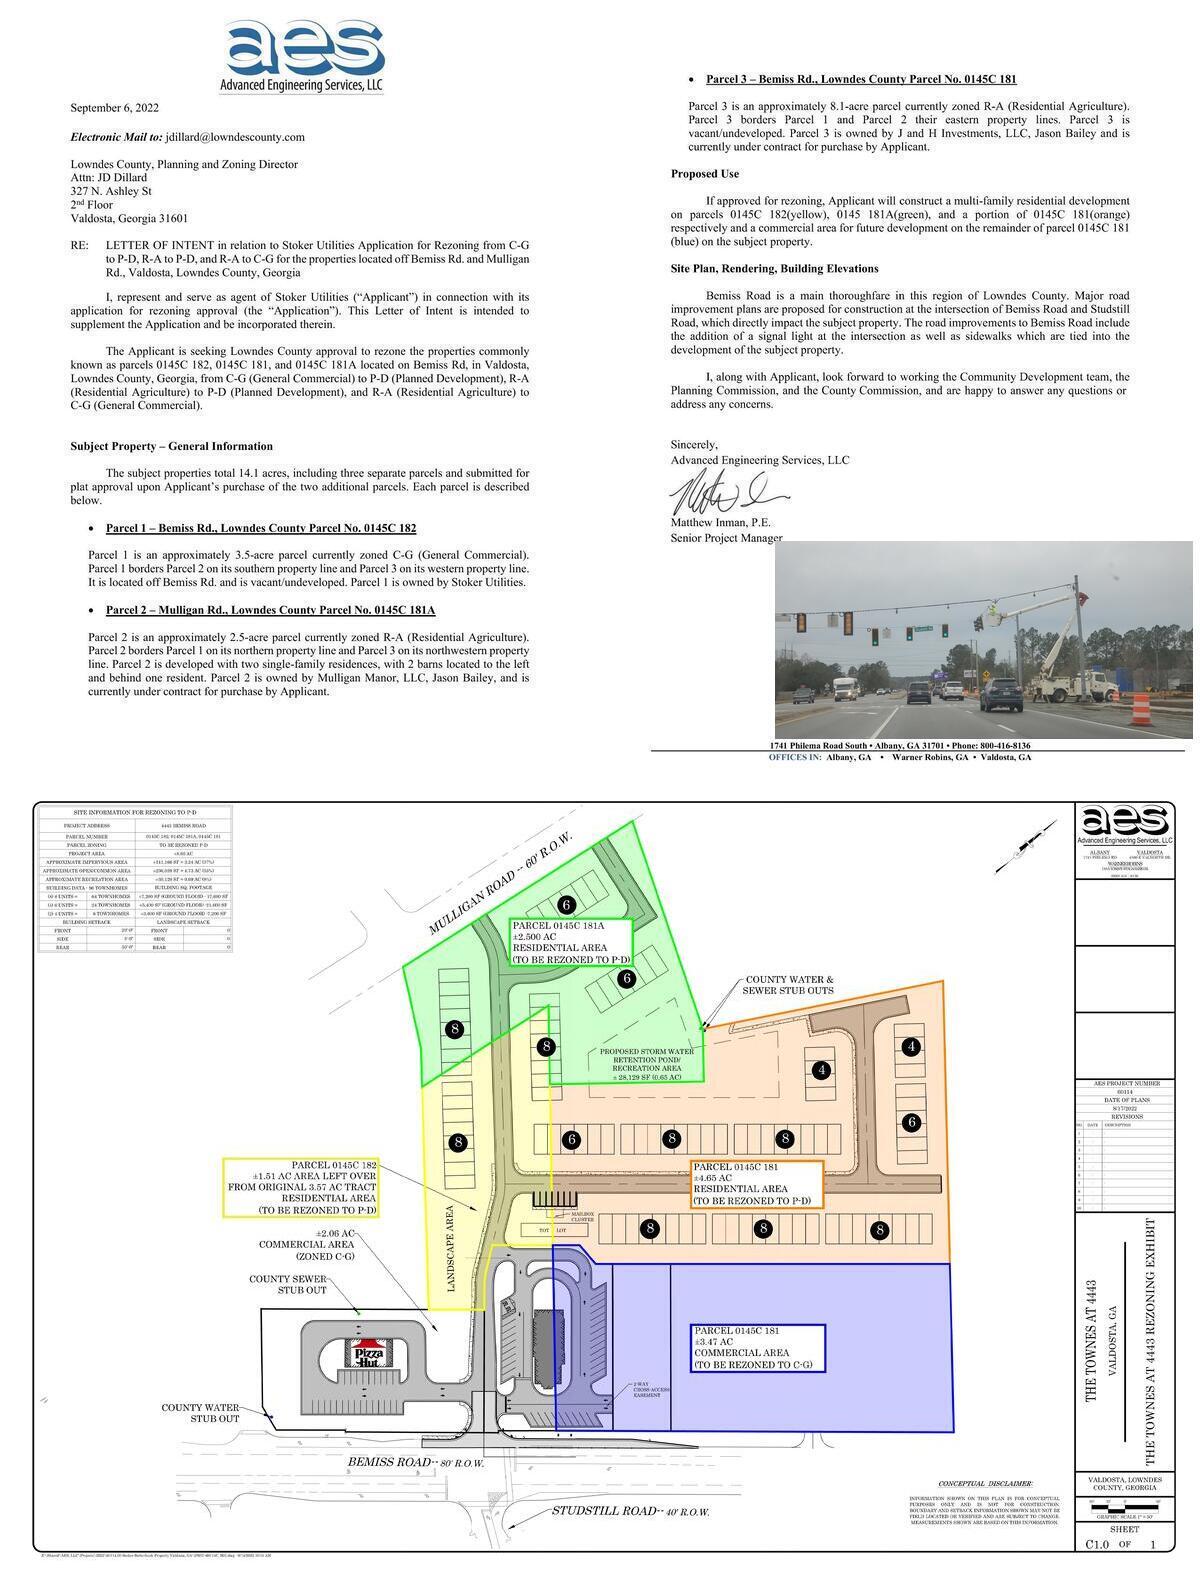 [The Towns at 4443 (Bemiss Road @ Studstill Road): letter of intent and Conceptual Plan @ GLPC 2022-09-26]